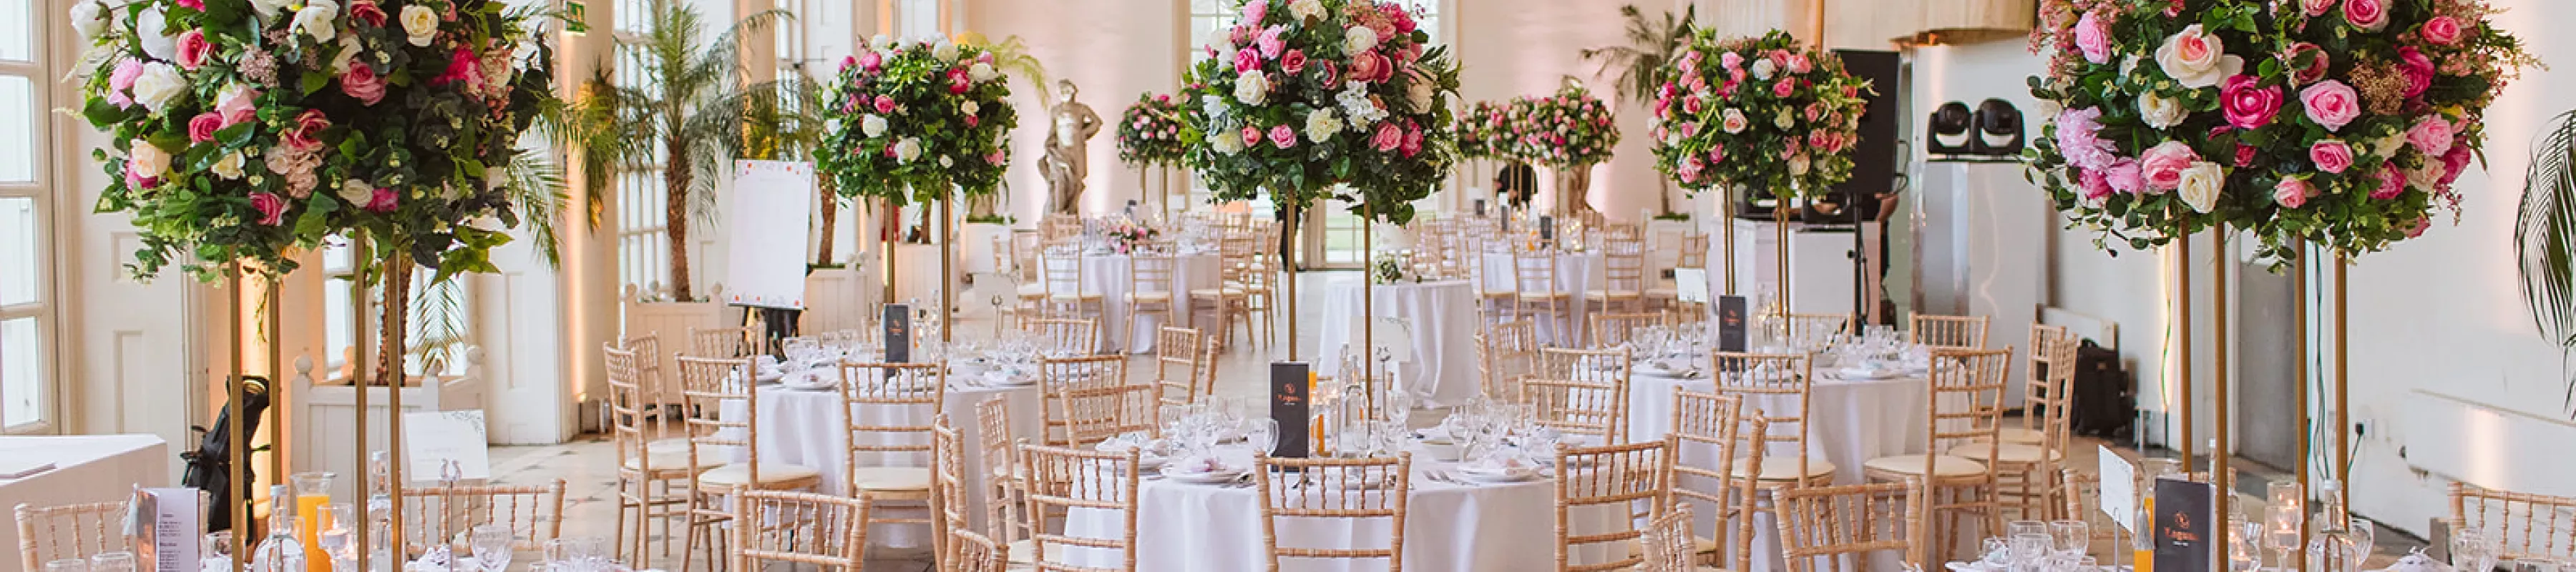 Round tables, large flower arrangements and wooden chairs at a wedding at Kew